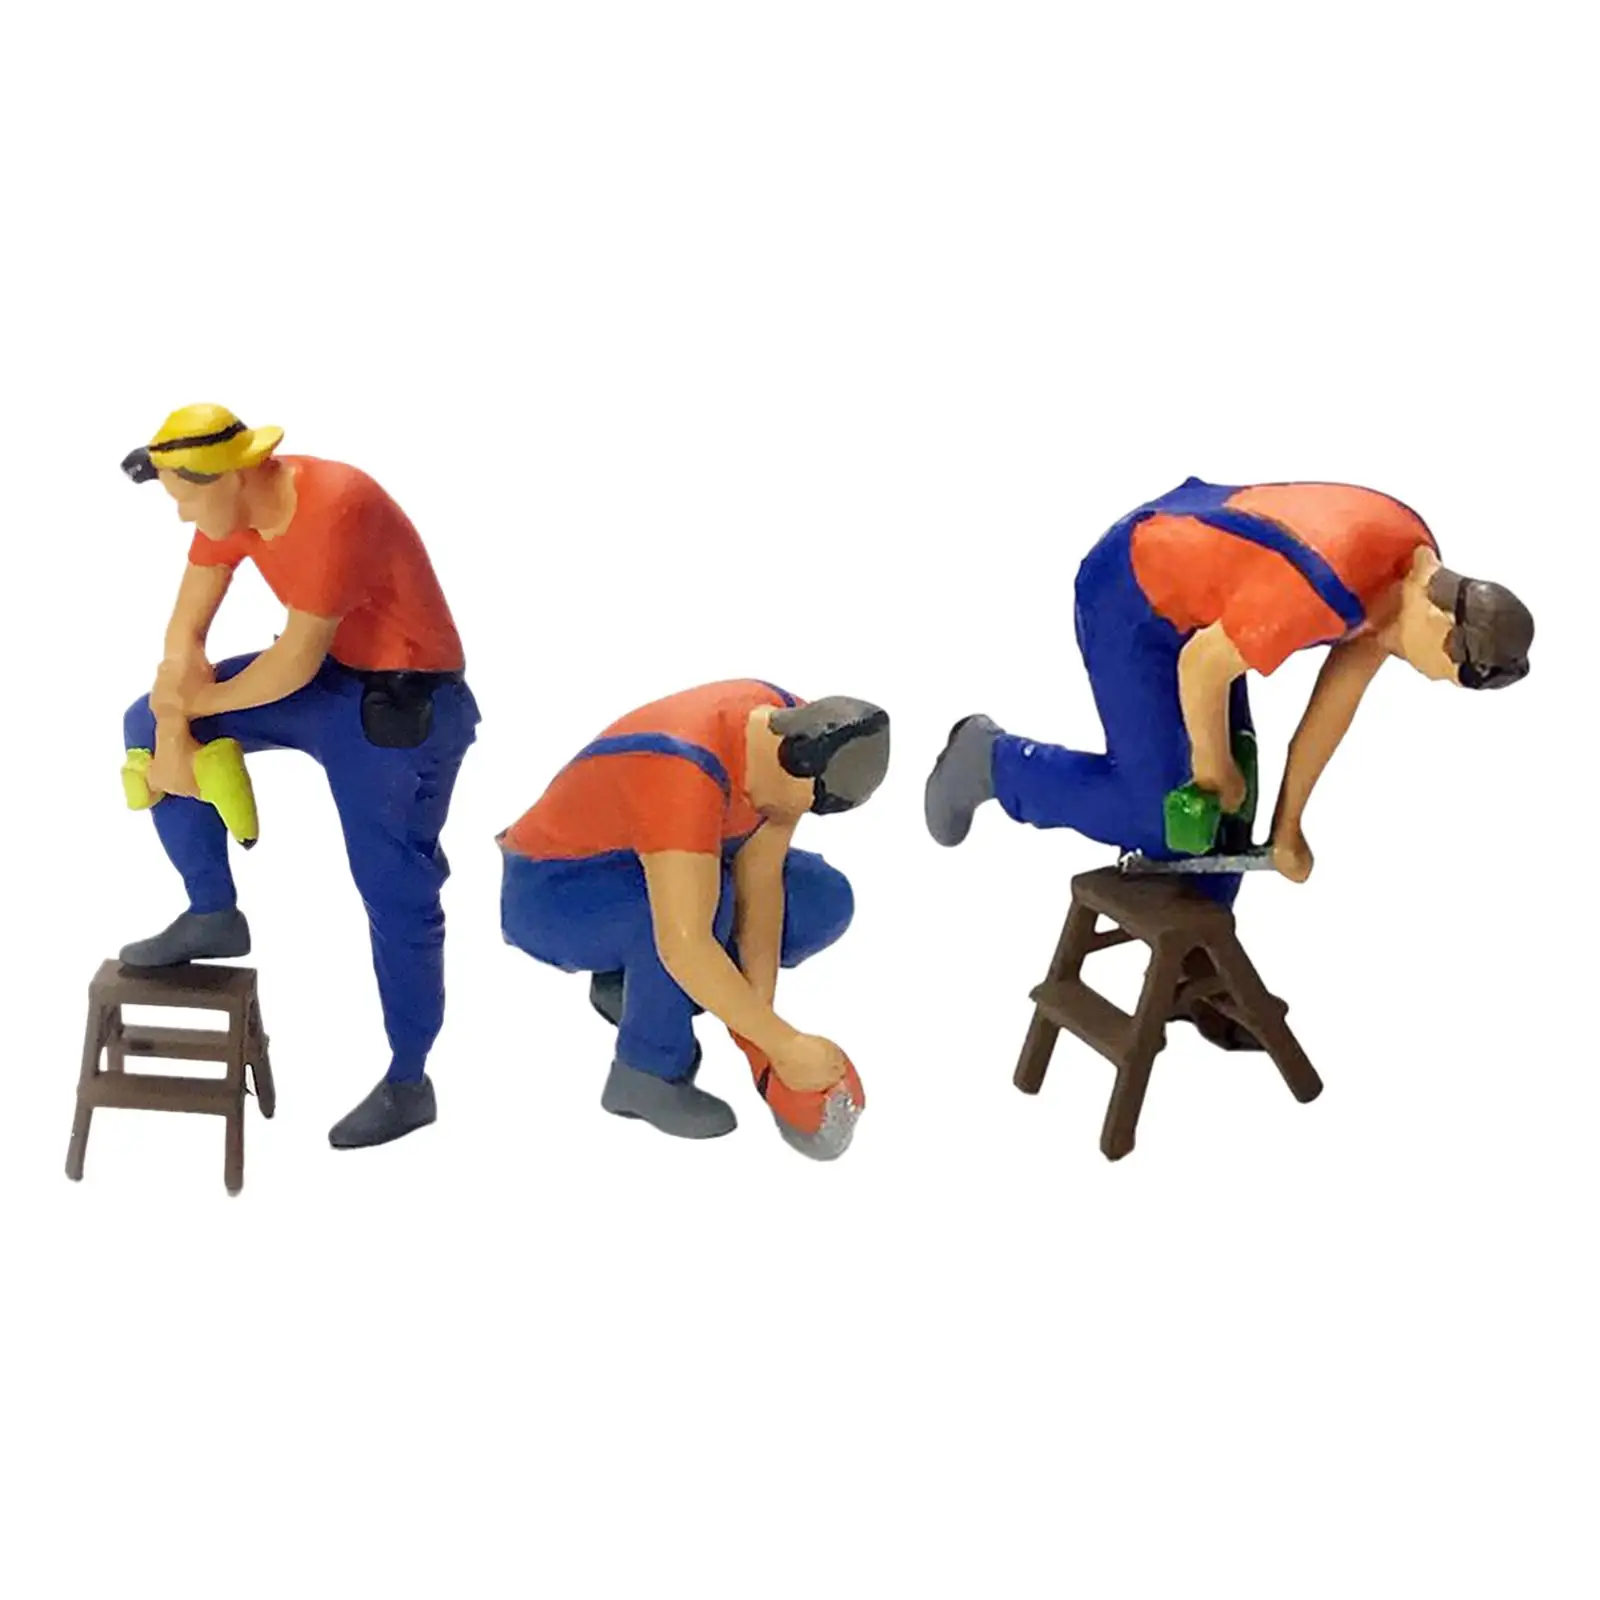 Hand Painted 1:87 Scale People Figure Railway Sand Table Ornaments workers Statue Photo Props Micro Landscape Durable Resin